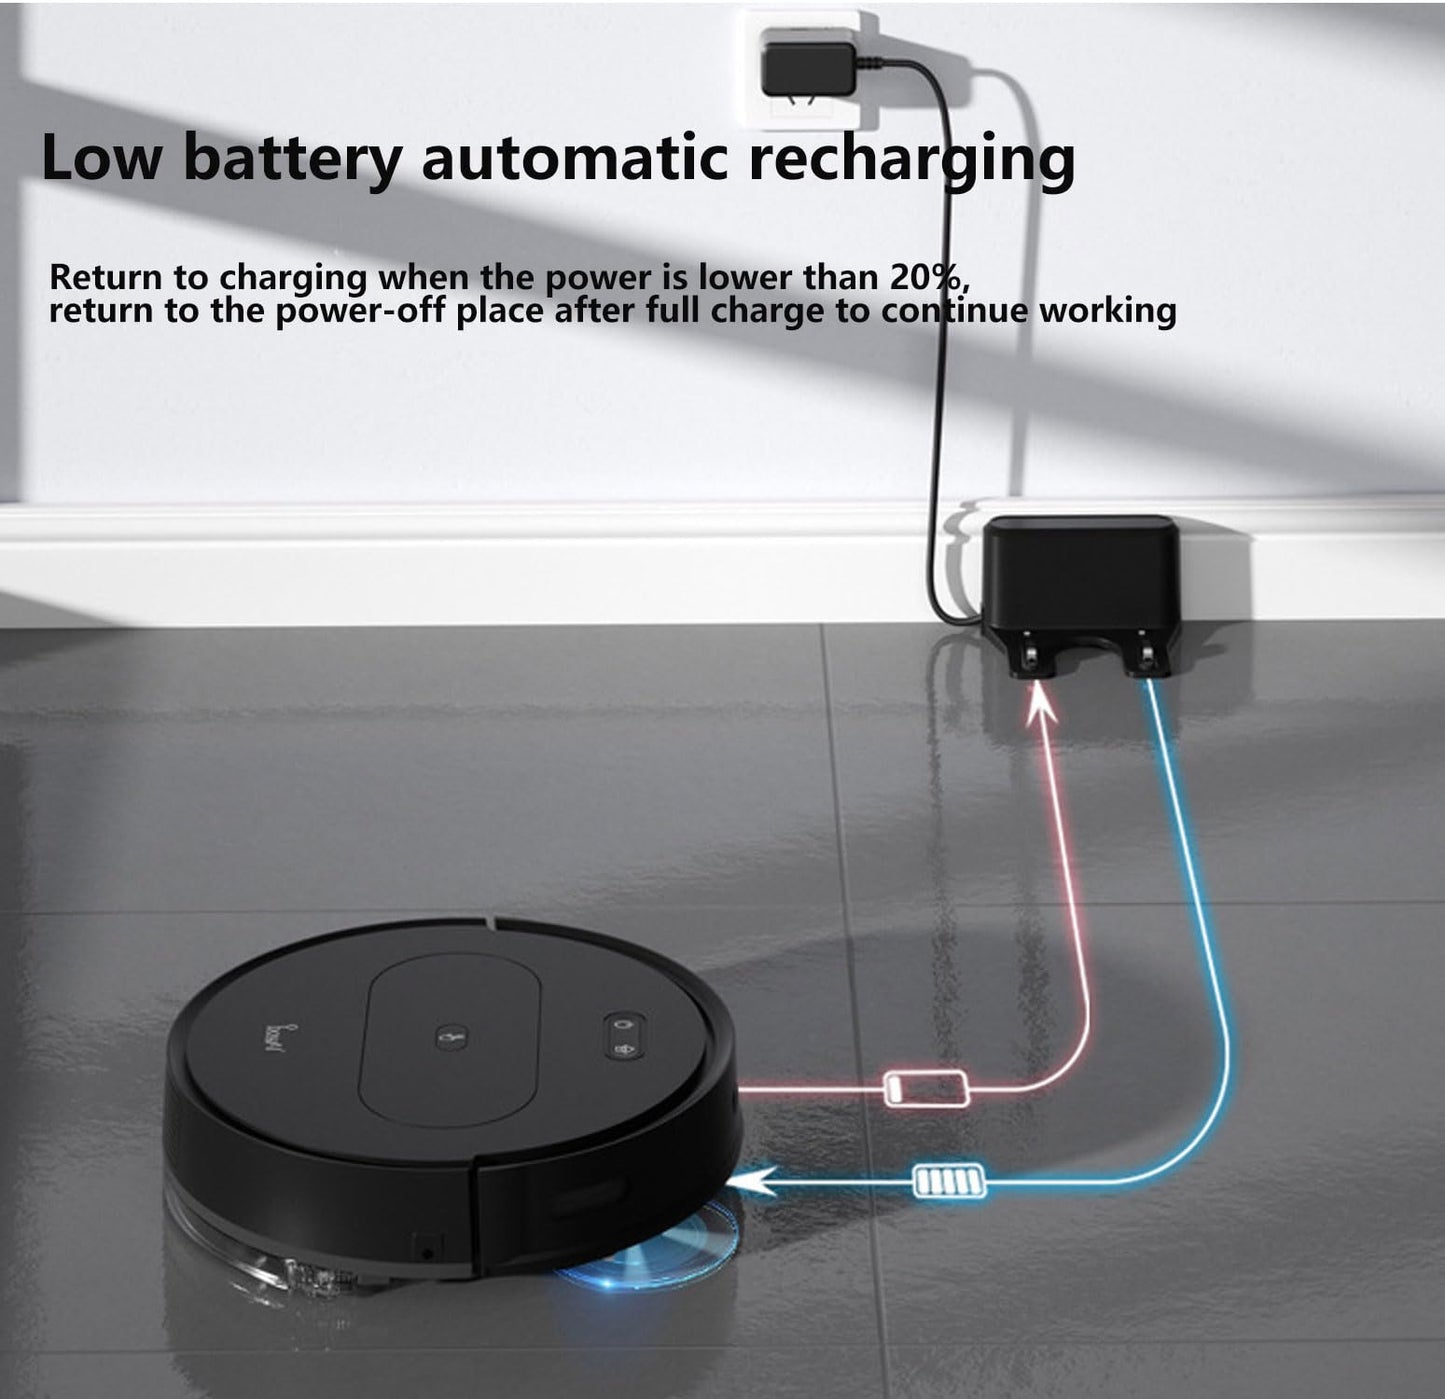 Robot Vacuum with Mop, 3600Pa Automatic Self-Charging Robotic Vacuum Cleaner,2 in 1 Mopping Robot Vacuum with Watertank & Dustbin,Self-Charging,Slim,Strong Suction,Ideal for Hard Floor,Pet Hair,Carpet